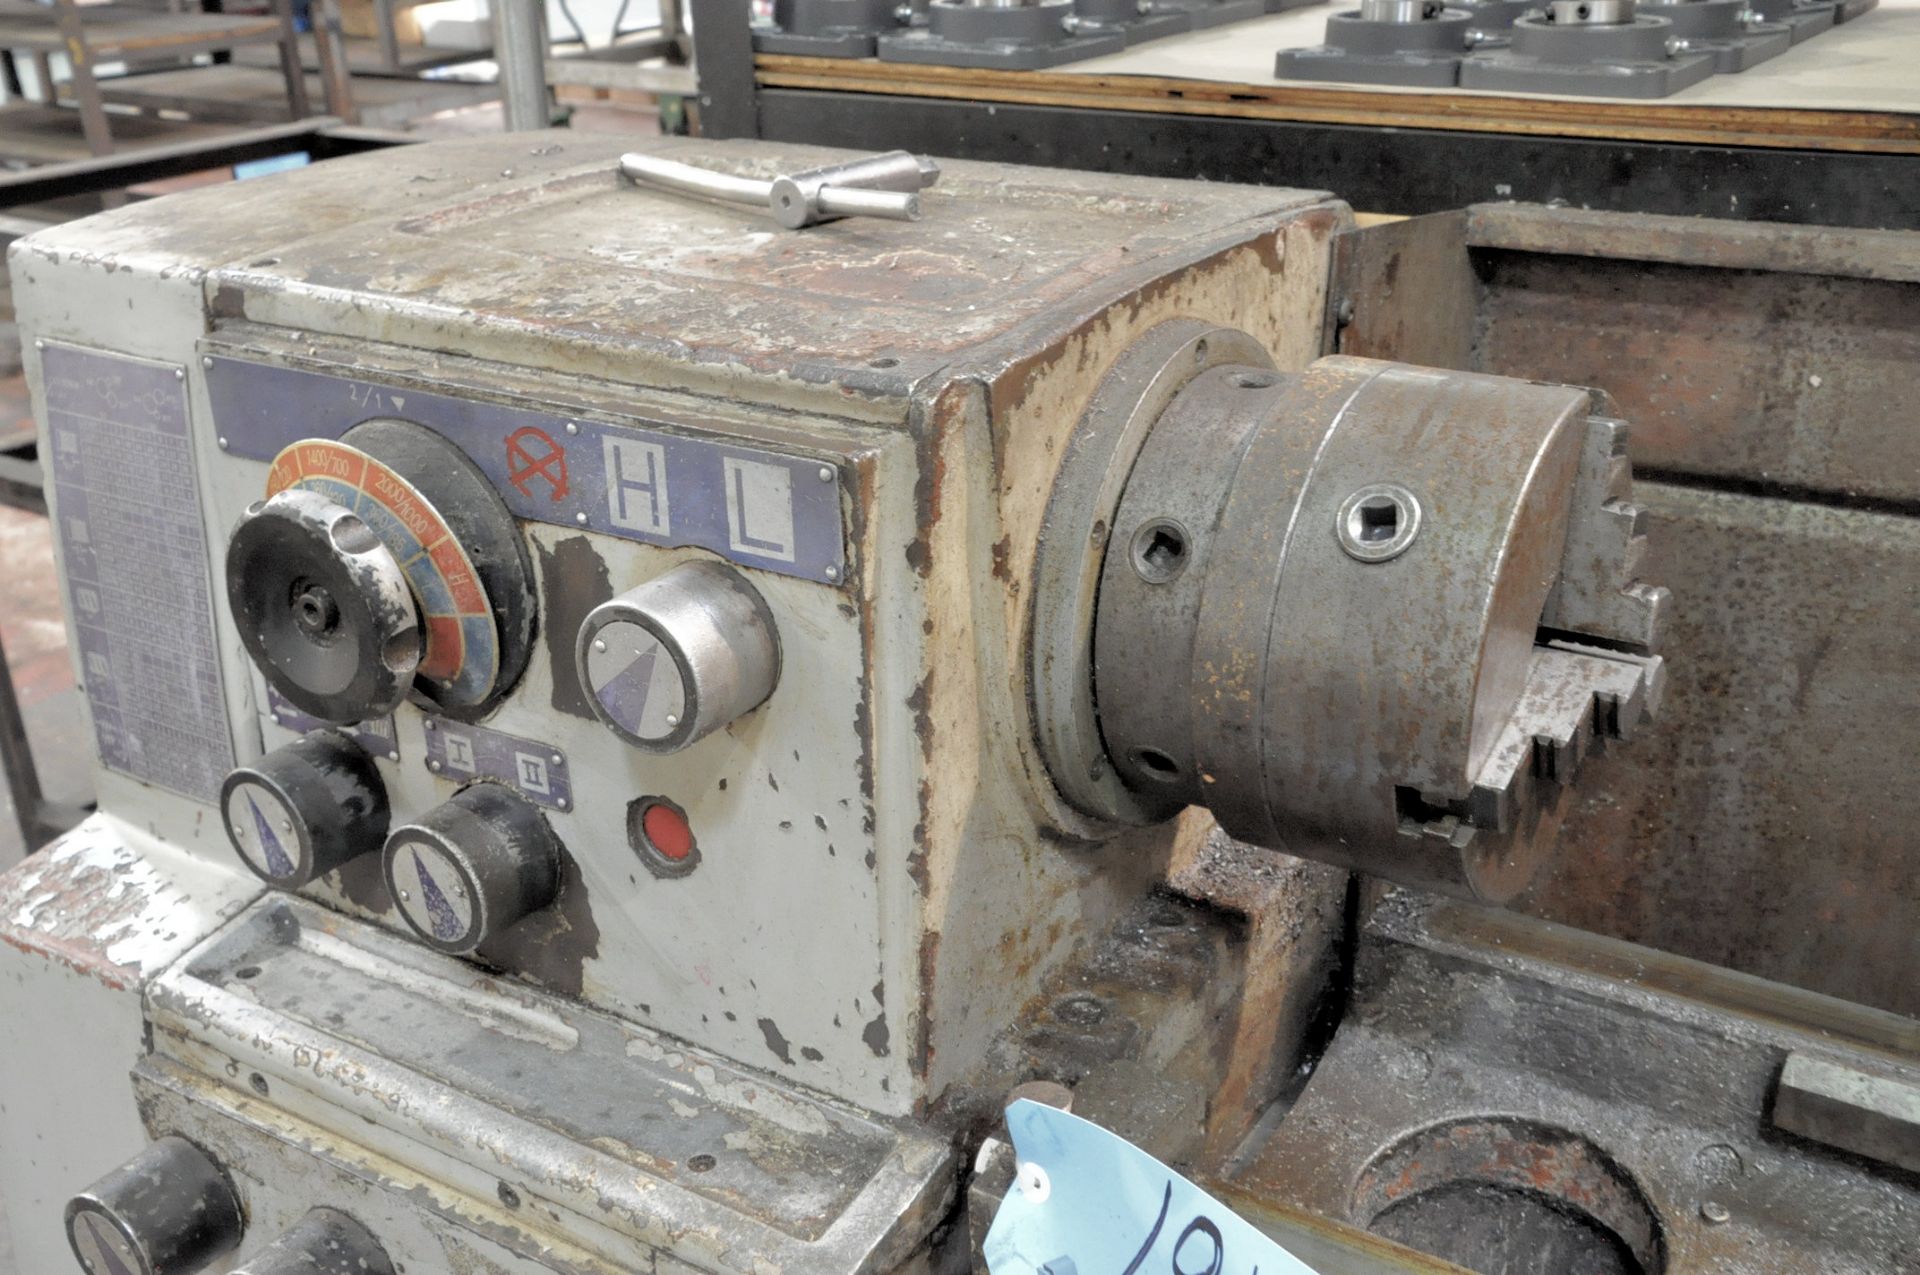 LS Model 1660G, 16" x 60" Geared Head Engine Lathe, (1994), 8" 3-Jaw Chuck, Tool Post, Tail Stock - Image 2 of 6